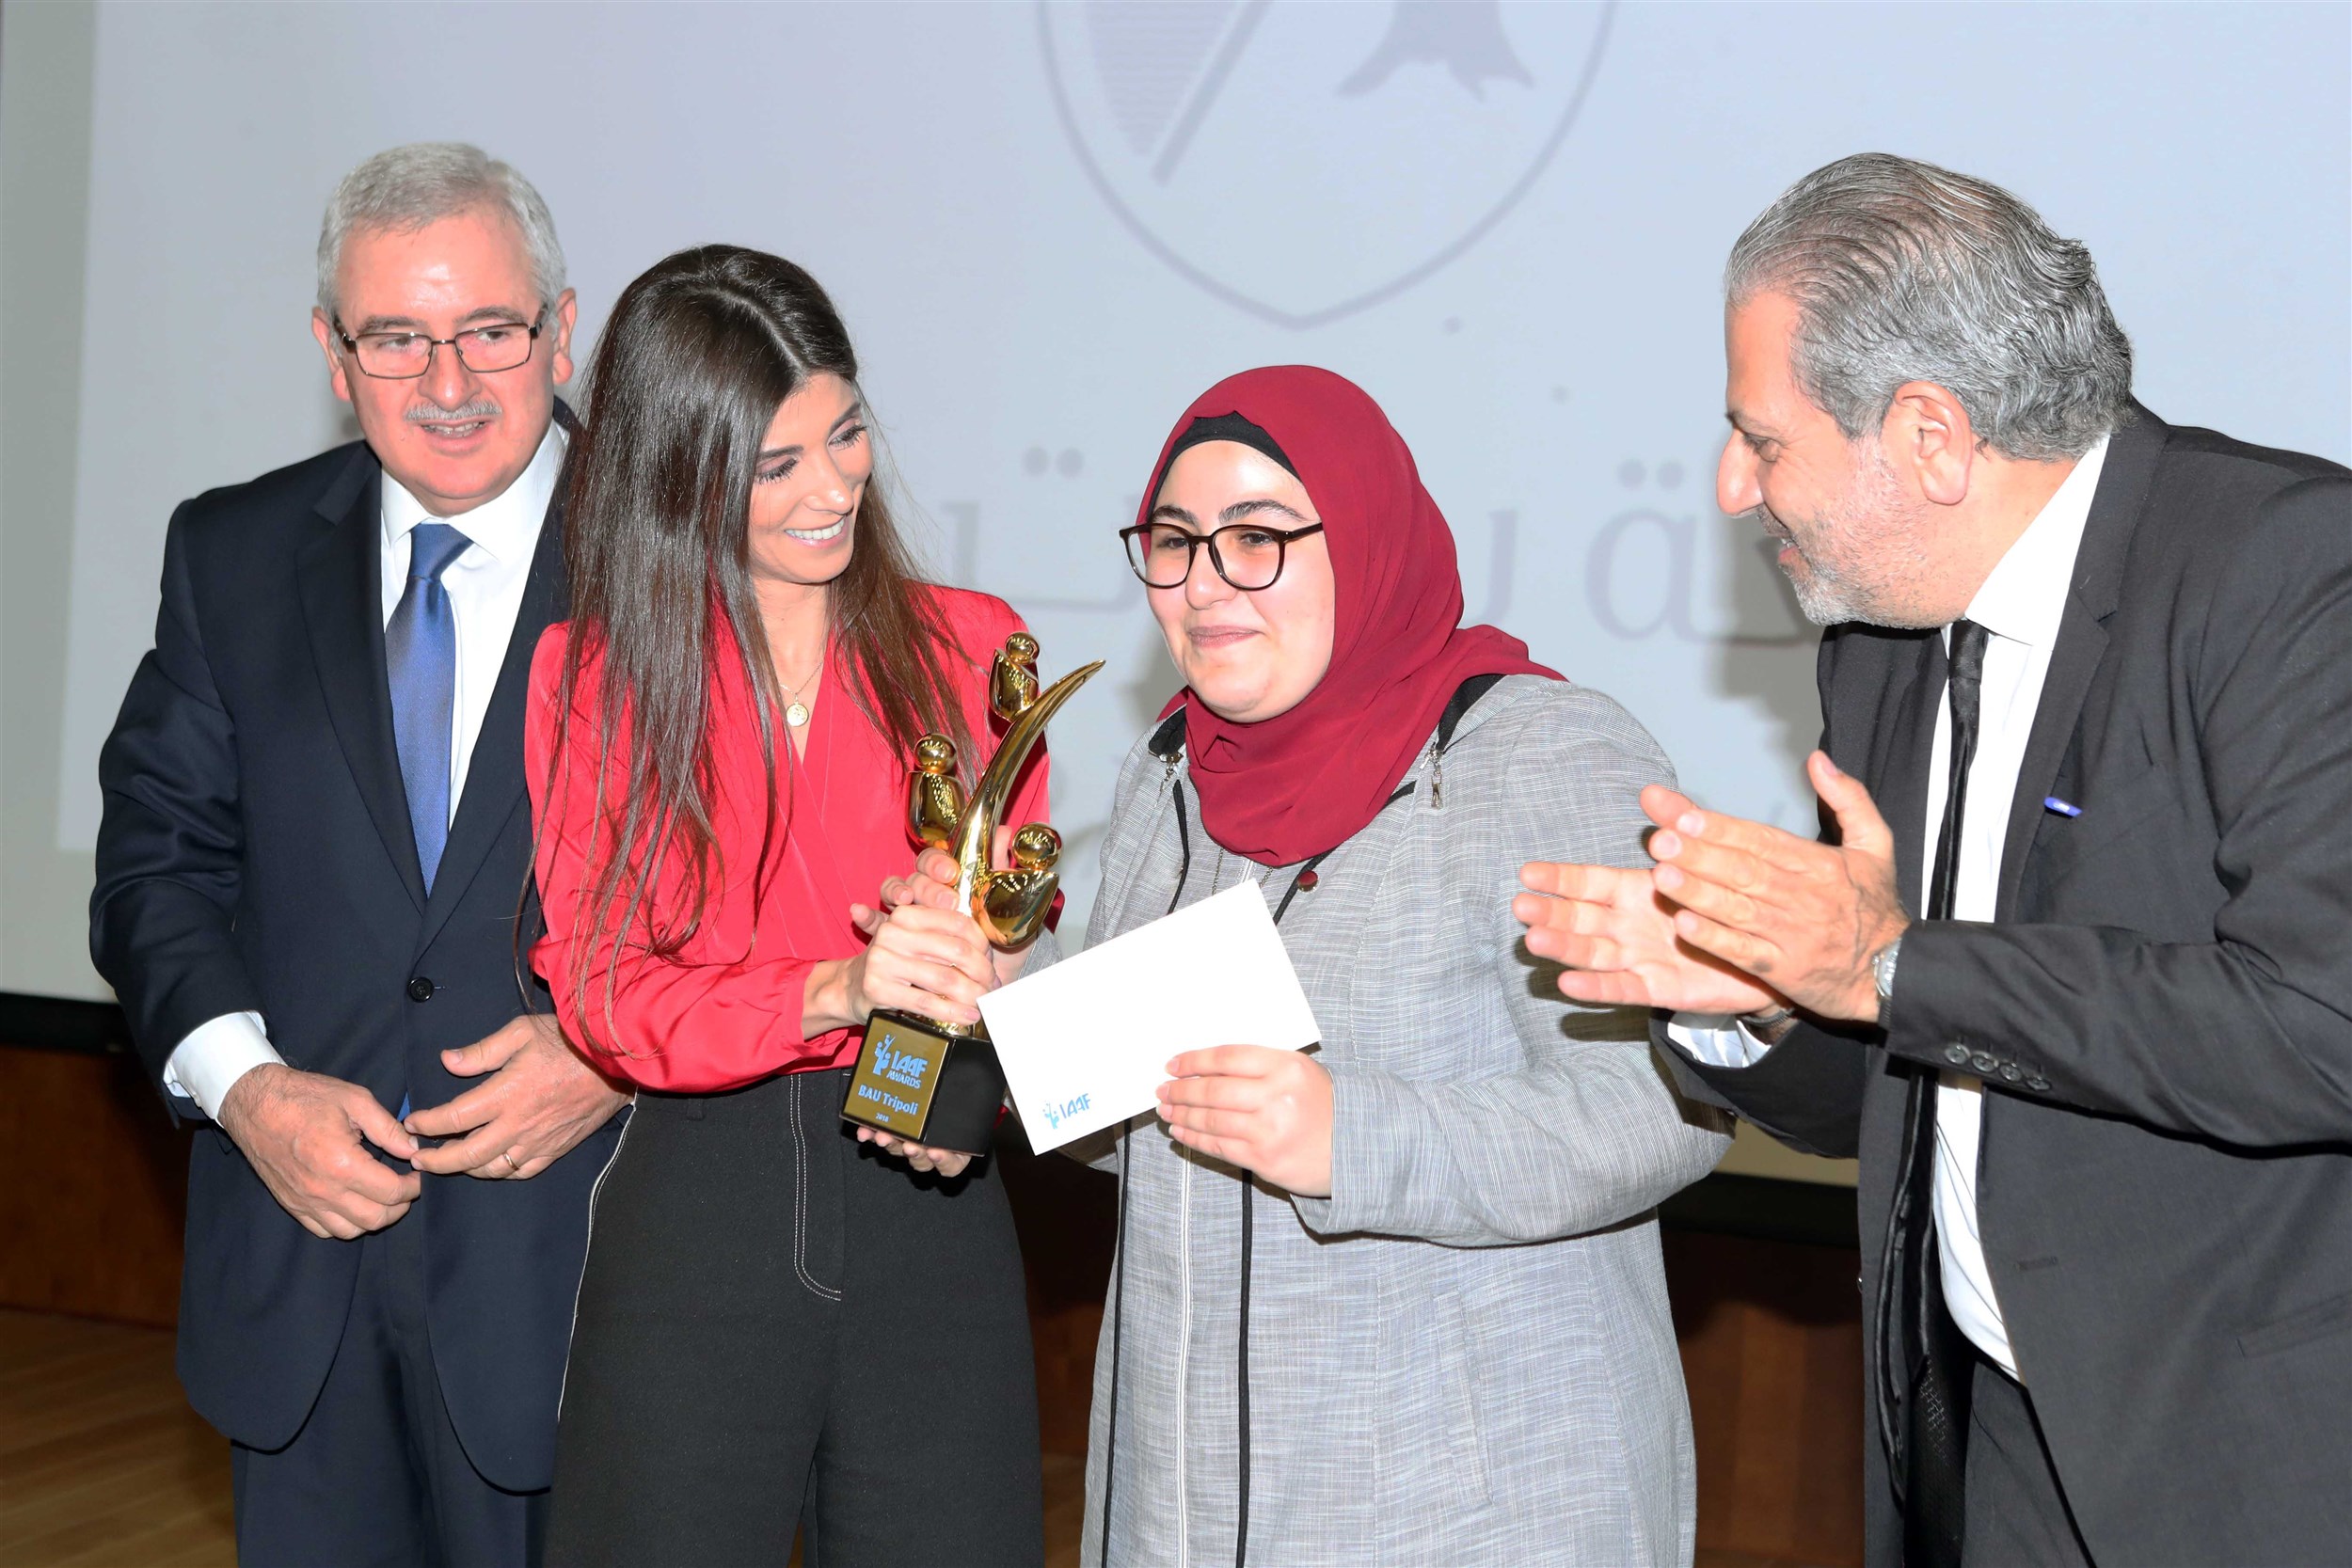 the winning student fatima al- fawal receives her monetary prize of $10,000 and trophy.